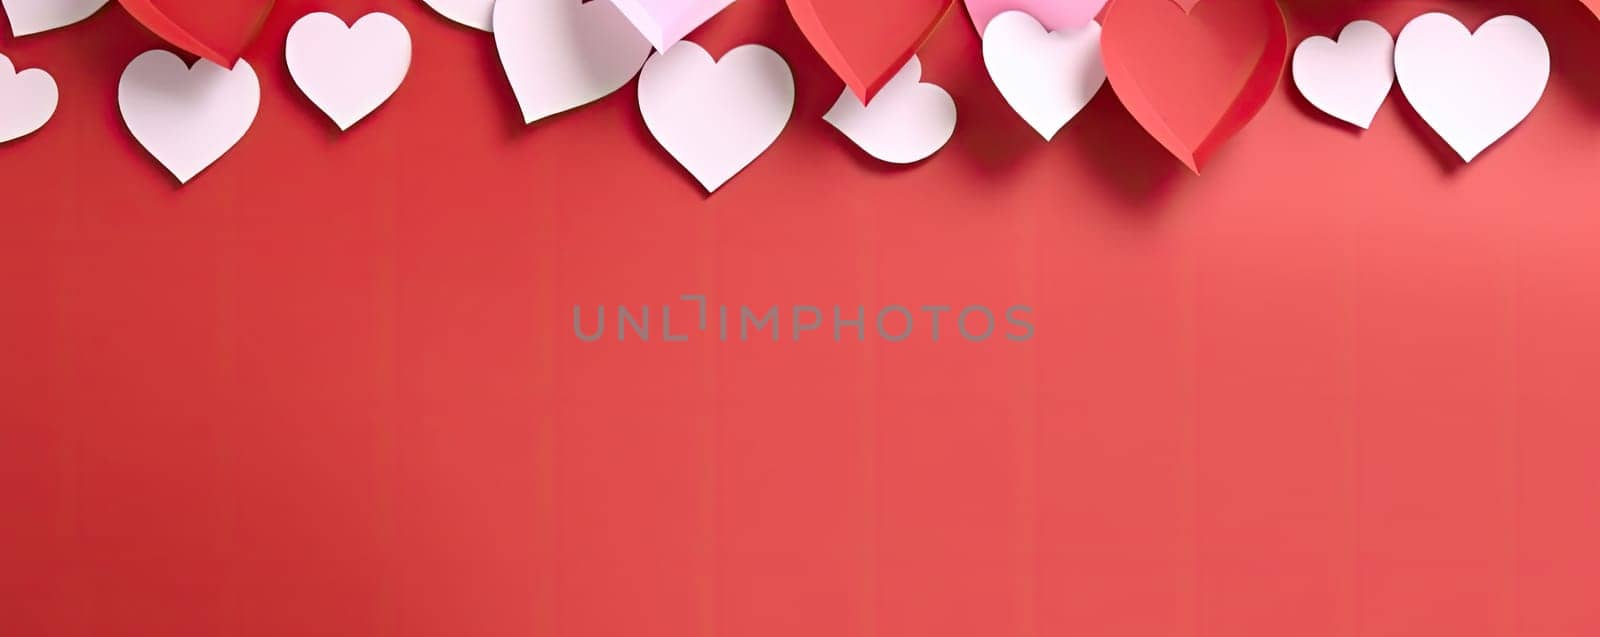 Red and white hearts on red background, romantic admiration by Yurich32